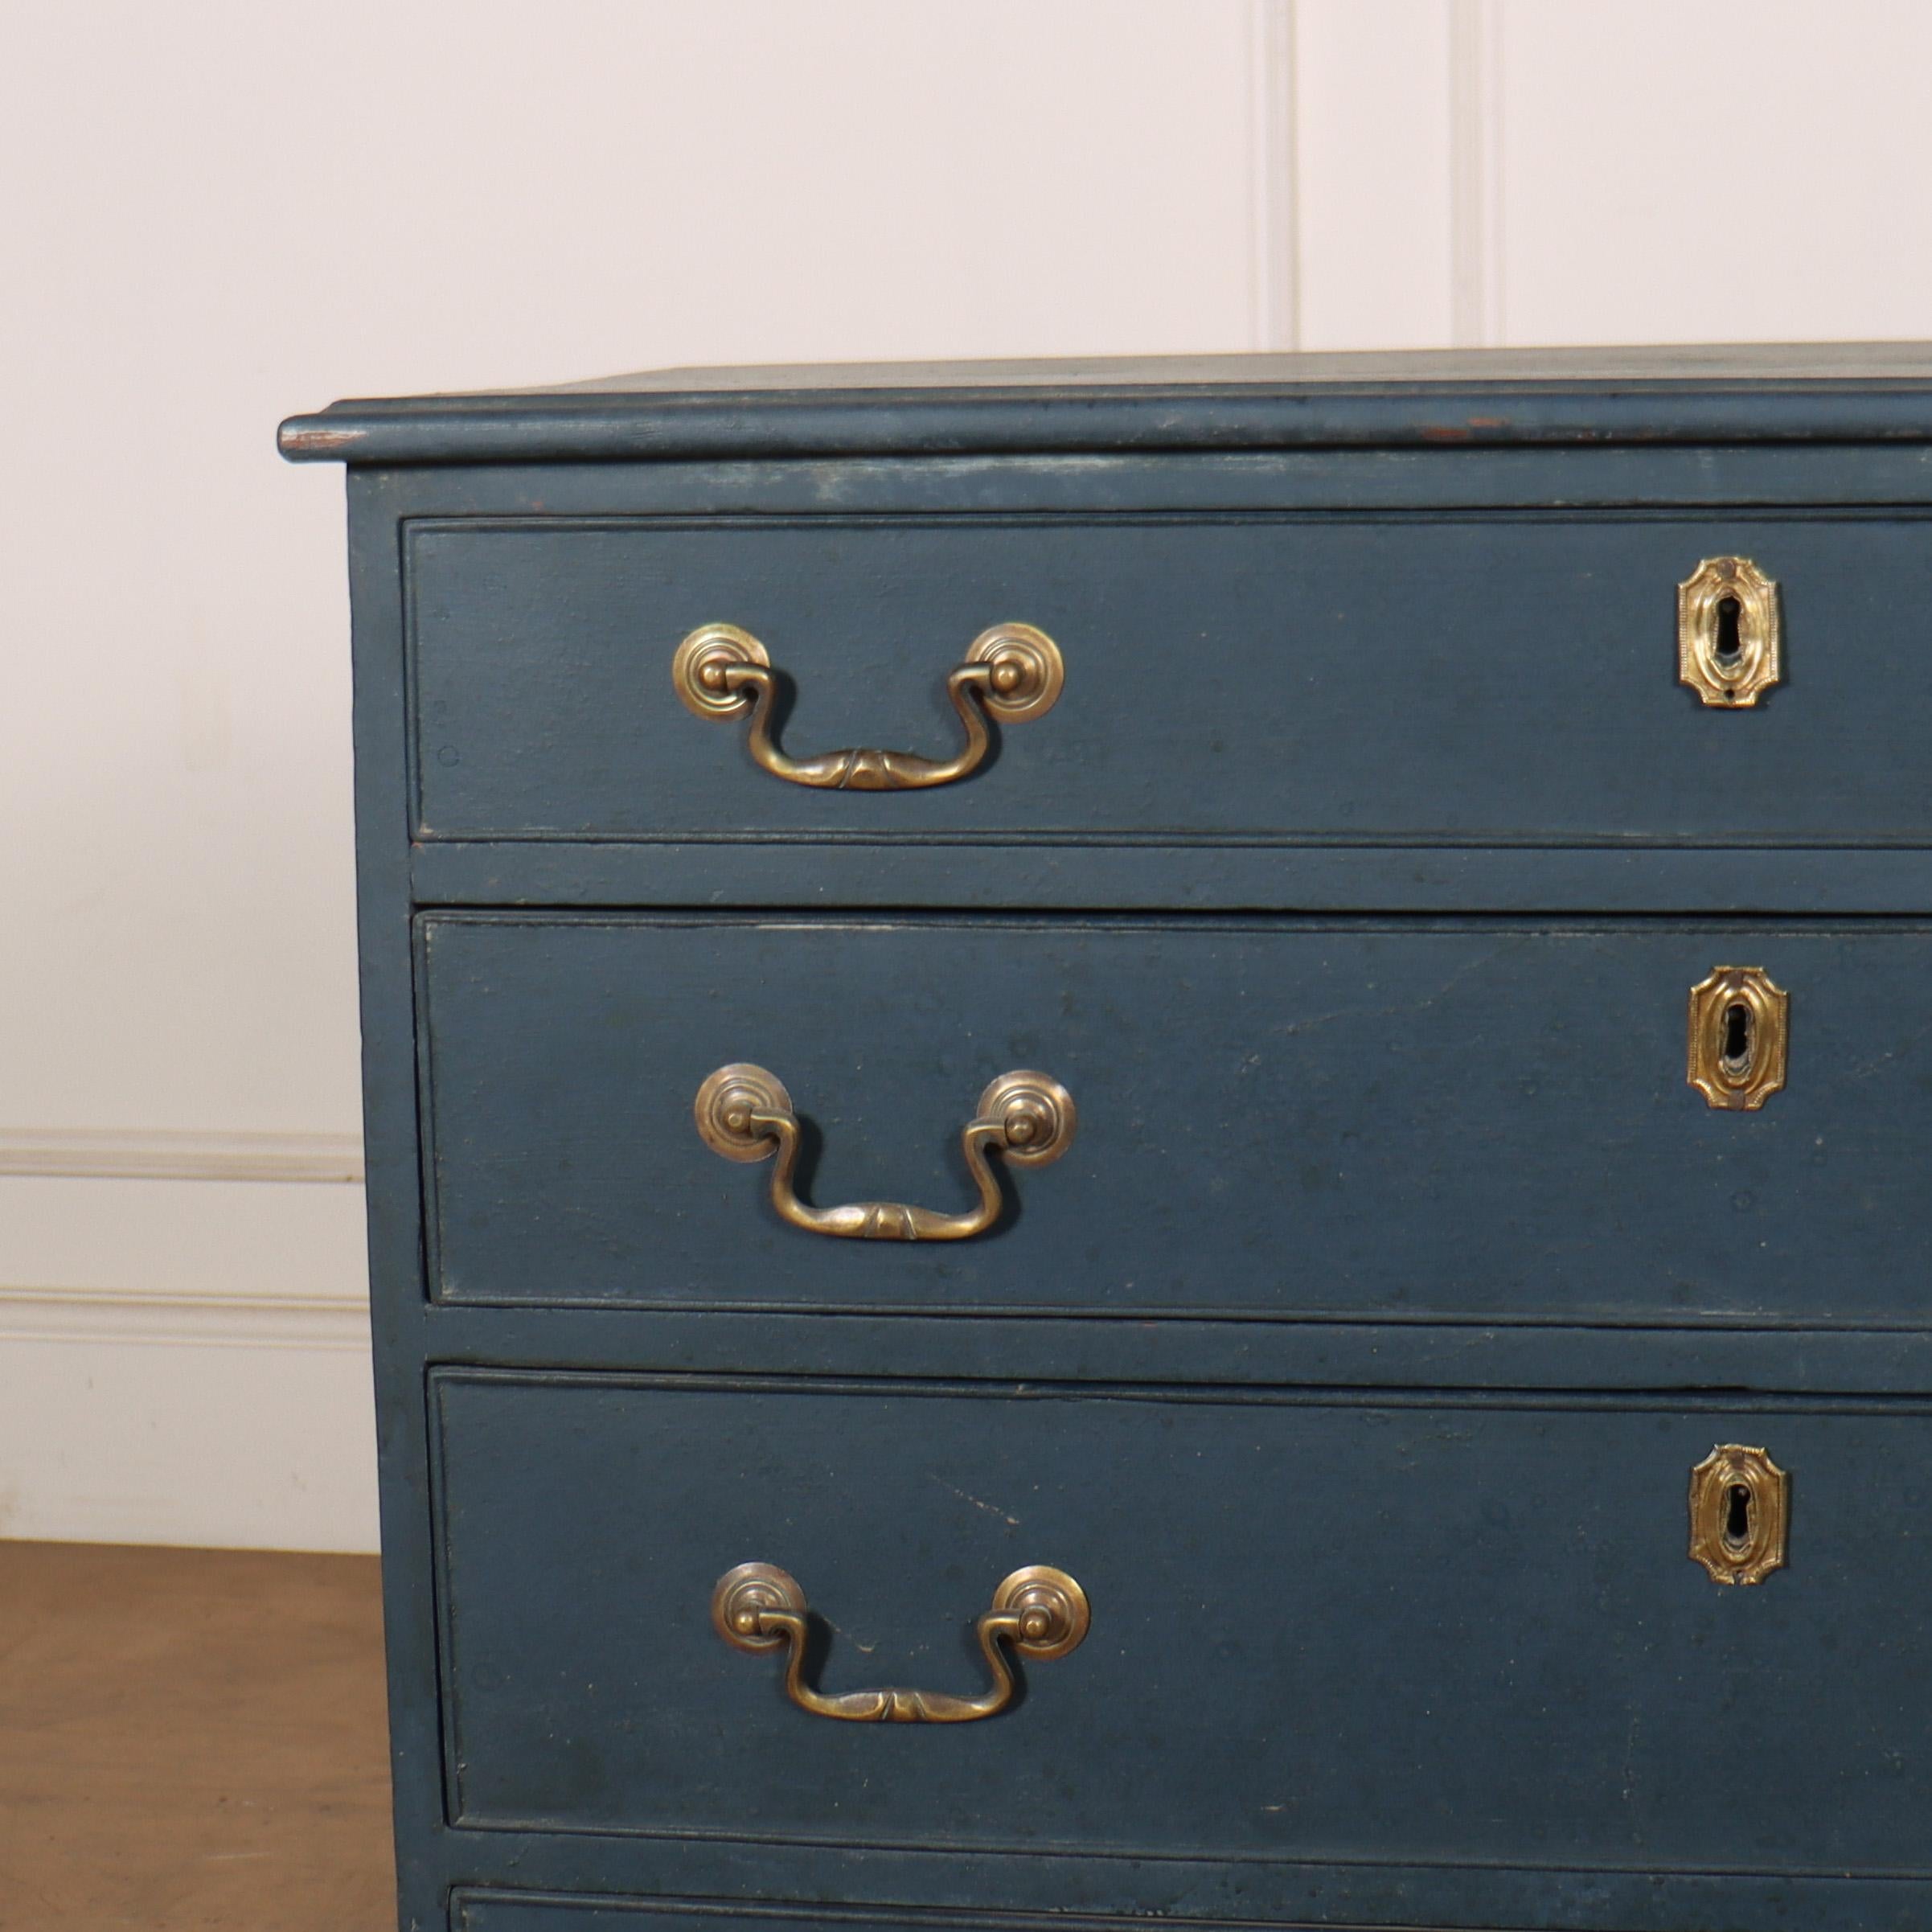 Small 18th C style painted oak English chest of drawers. 1860.

Reference: 8090

Dimensions
34.5 inches (88 cms) Wide
19 inches (48 cms) Deep
31.5 inches (80 cms) High